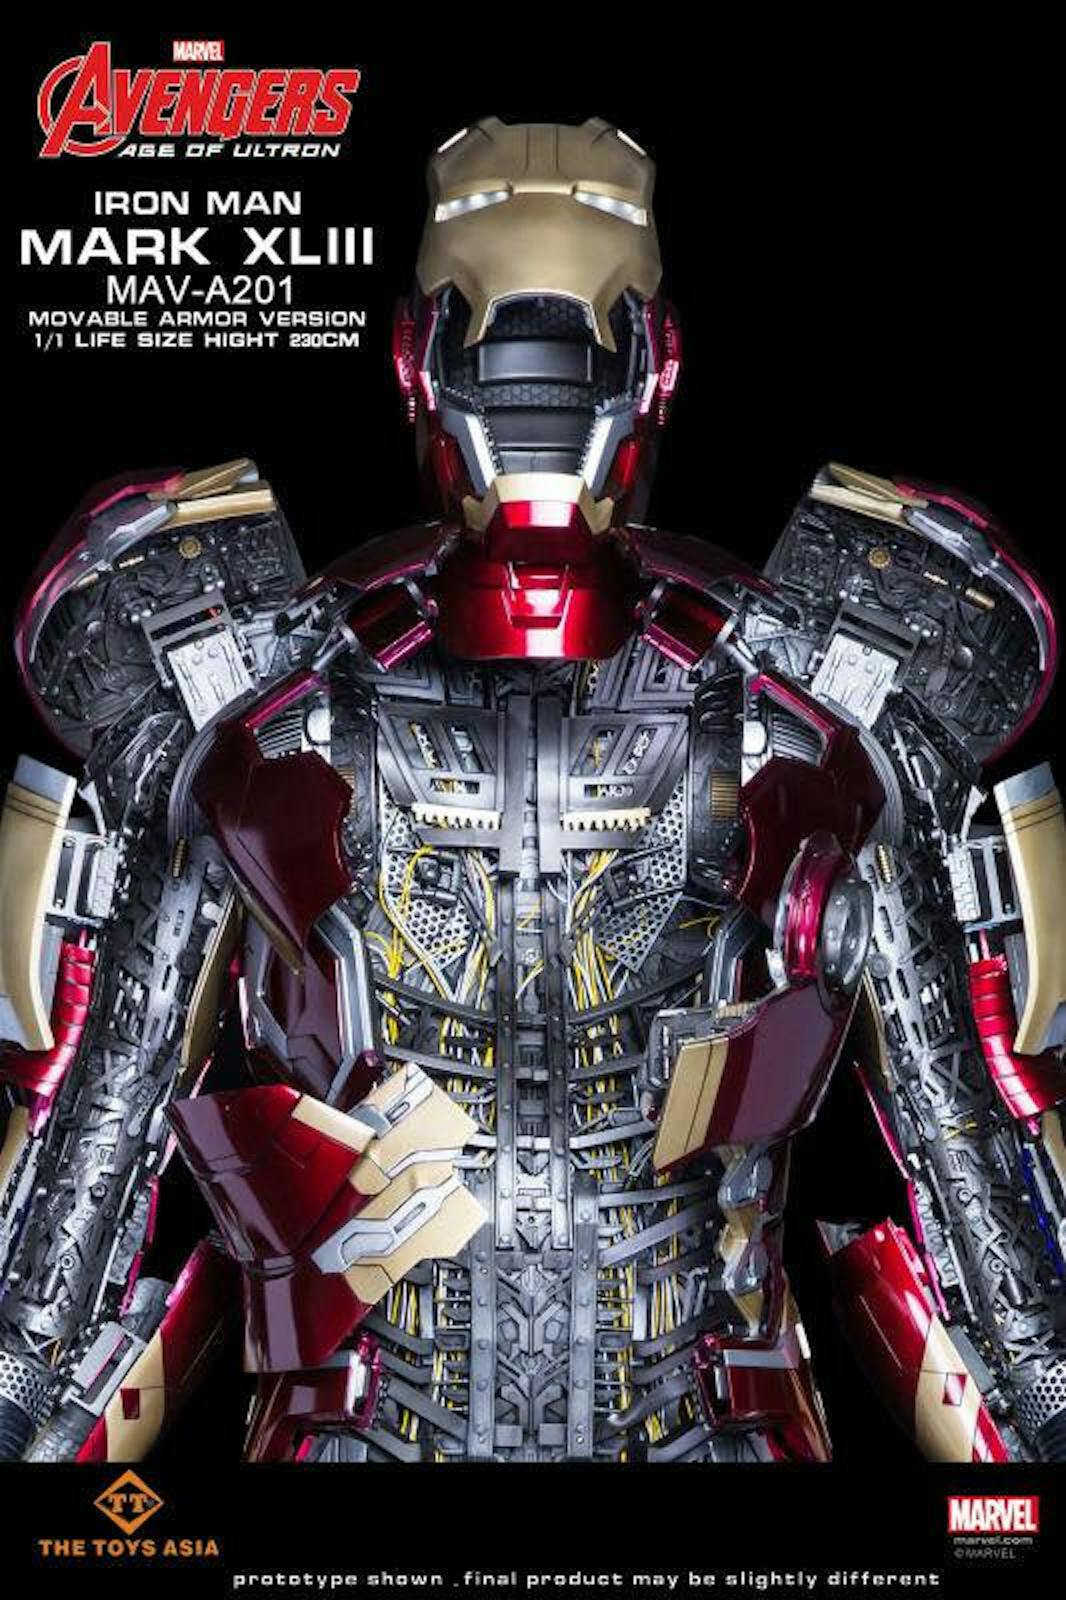 Life-Sized Iron Man Suit Has 46 Motors and Costs $365,000 | Inverse